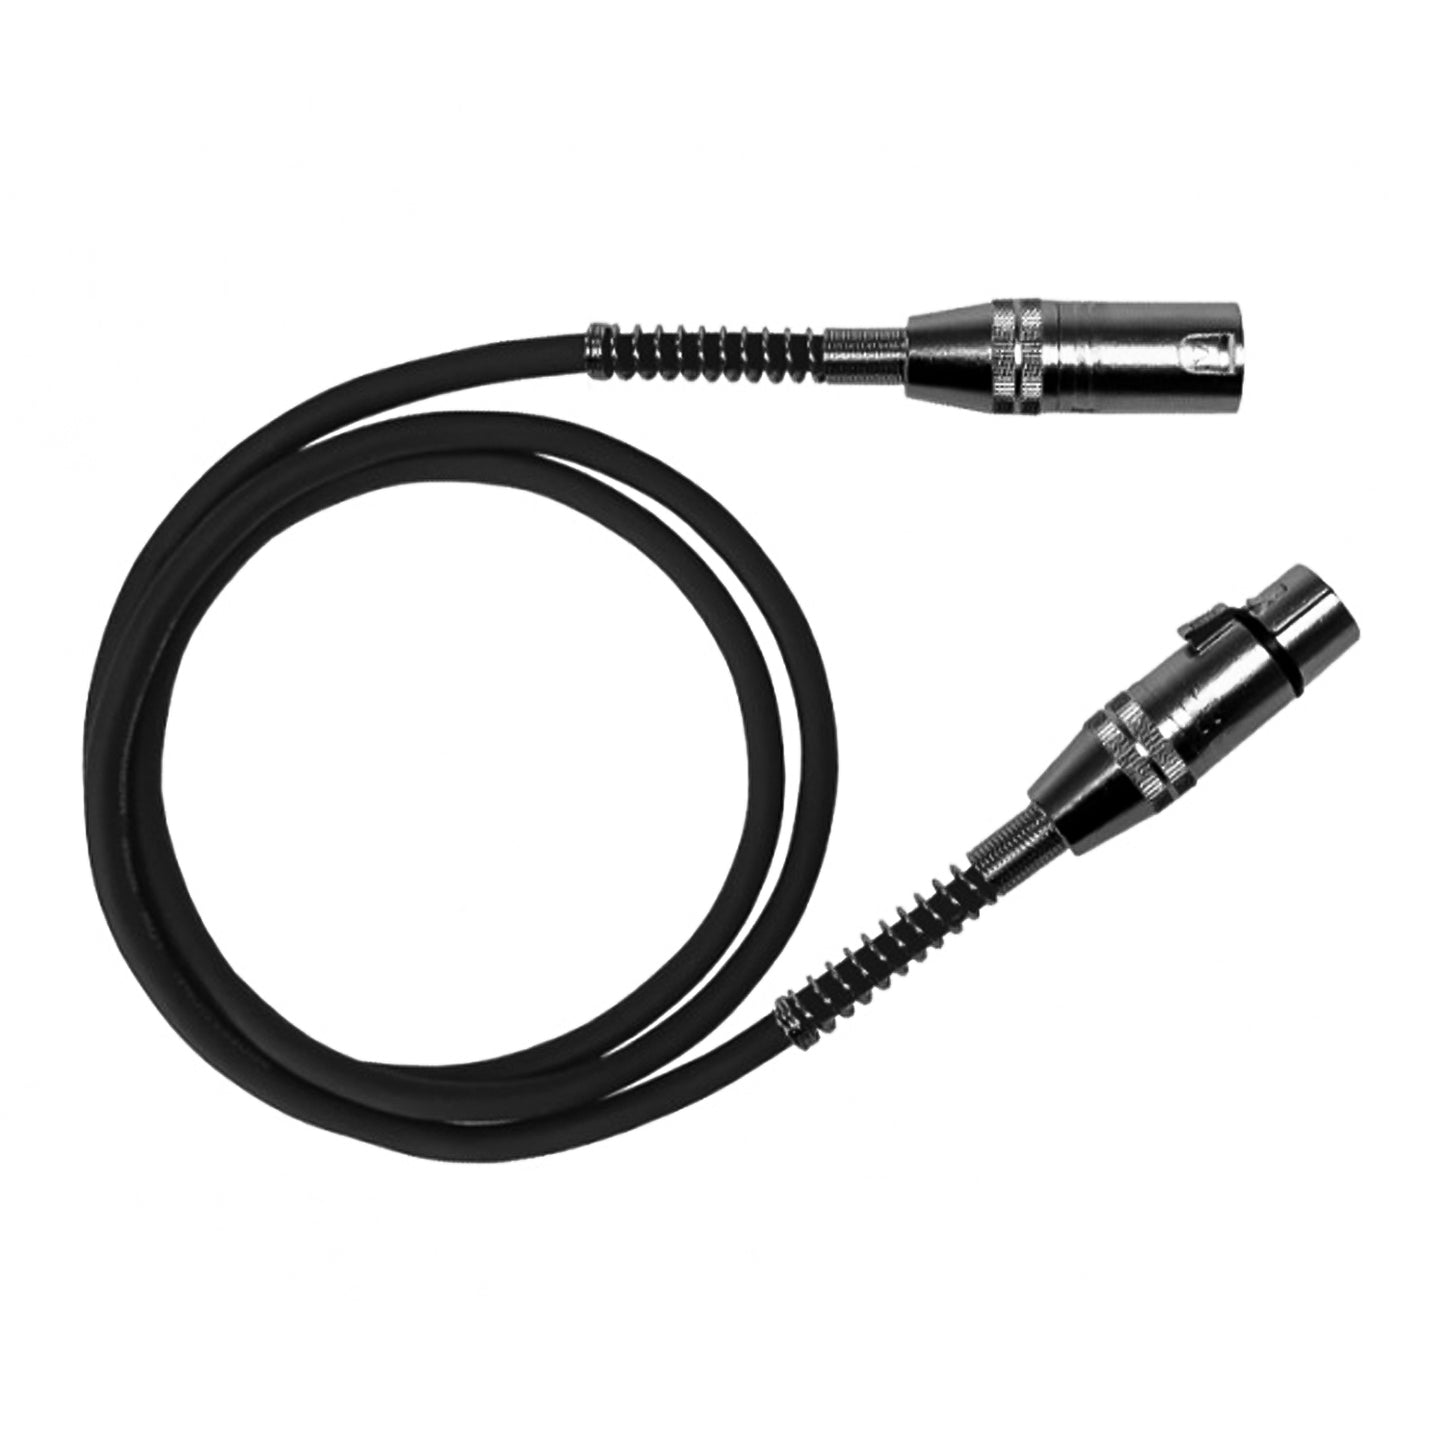 ZZIPP 6 Meter XLRM-XLRF Microphone Cable, Twist Protection Microphone Connector, Long Audio Cable